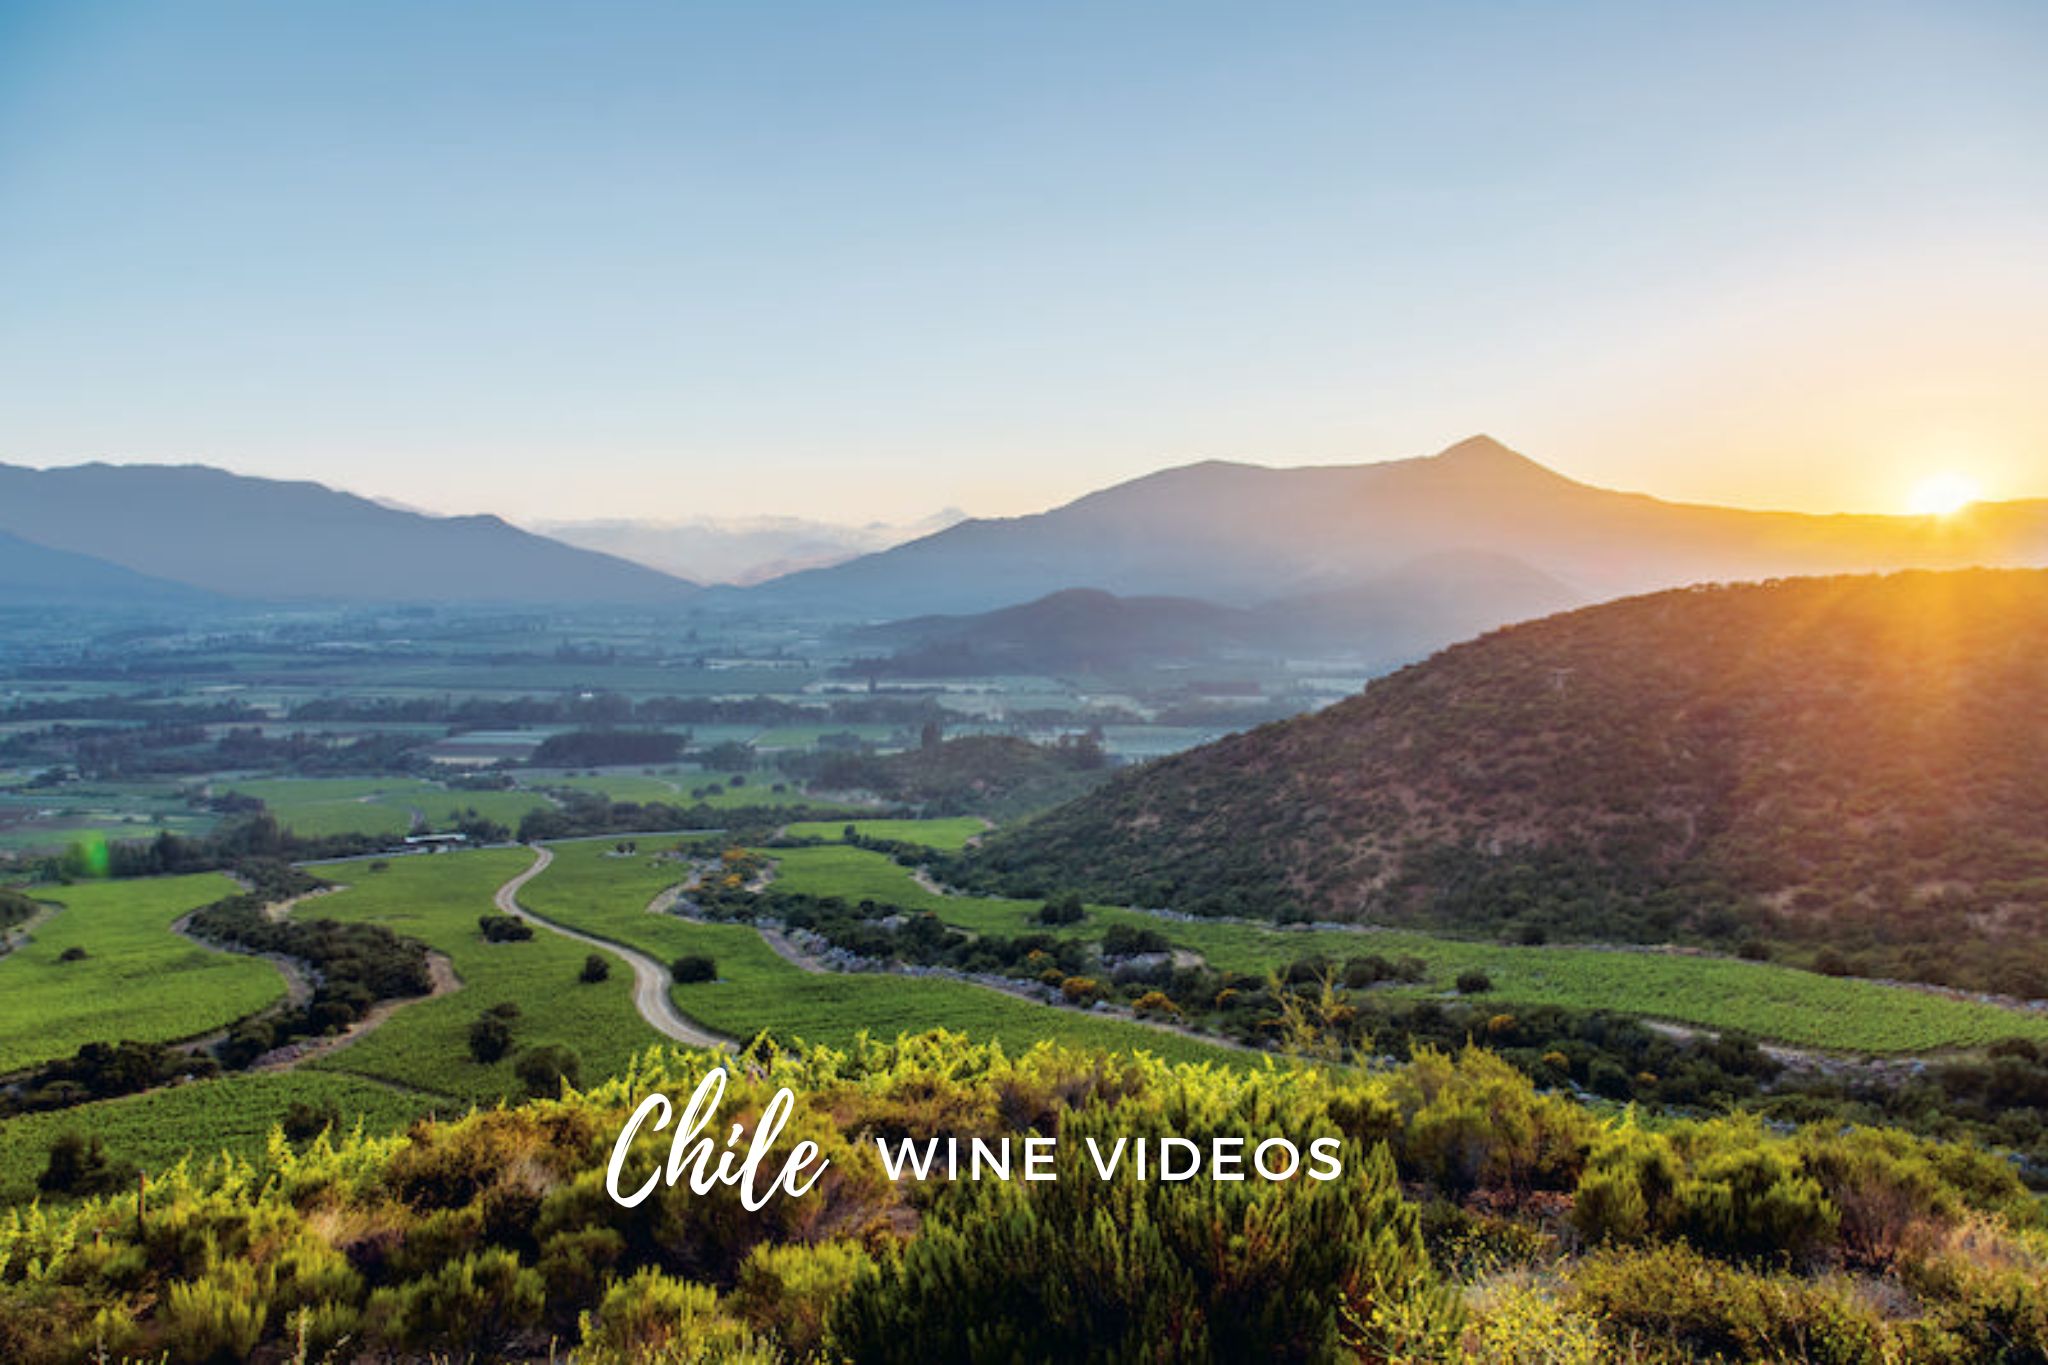 Discover the Chile wine videos guide with interviews to winemakers